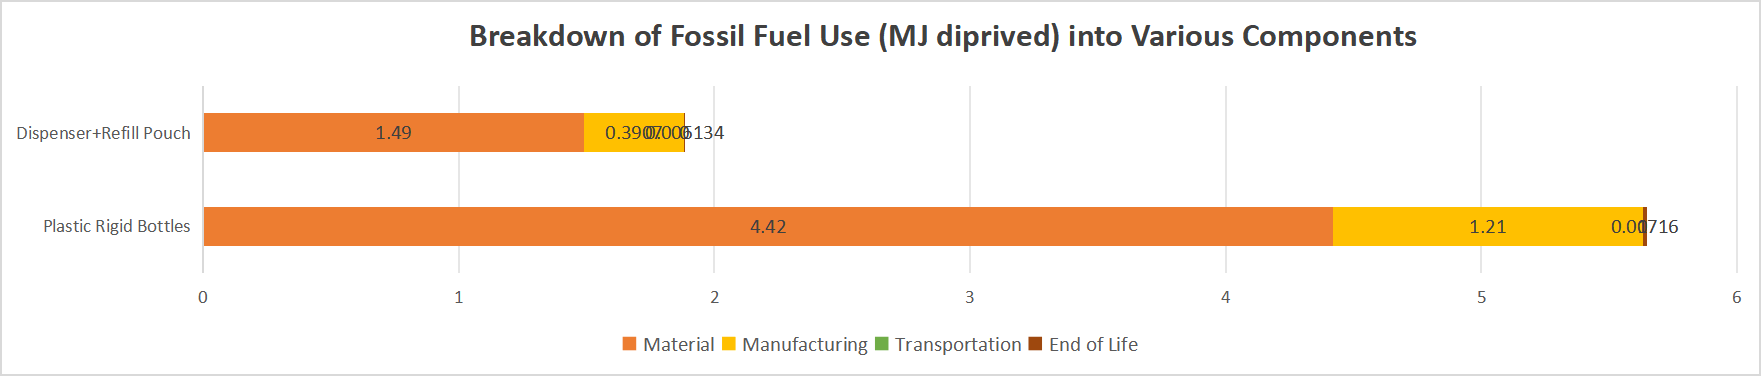 Breakdown of Fossil Fuel Use (MJ deprived) into Various Componenet